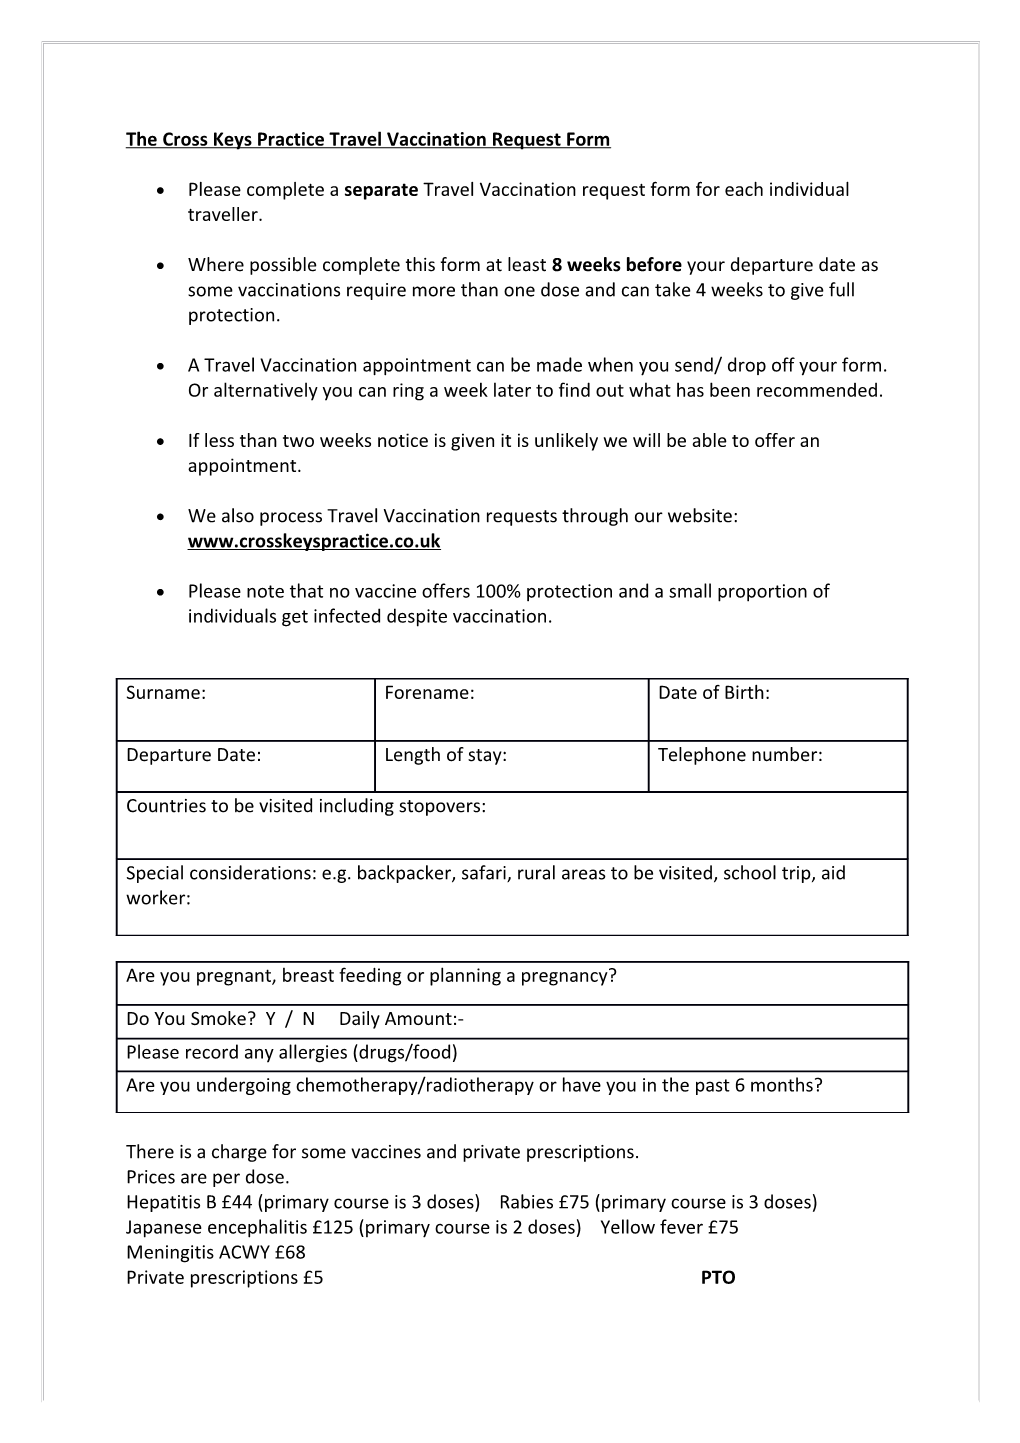 The Cross Keys Practice Travel Vaccination Request Form